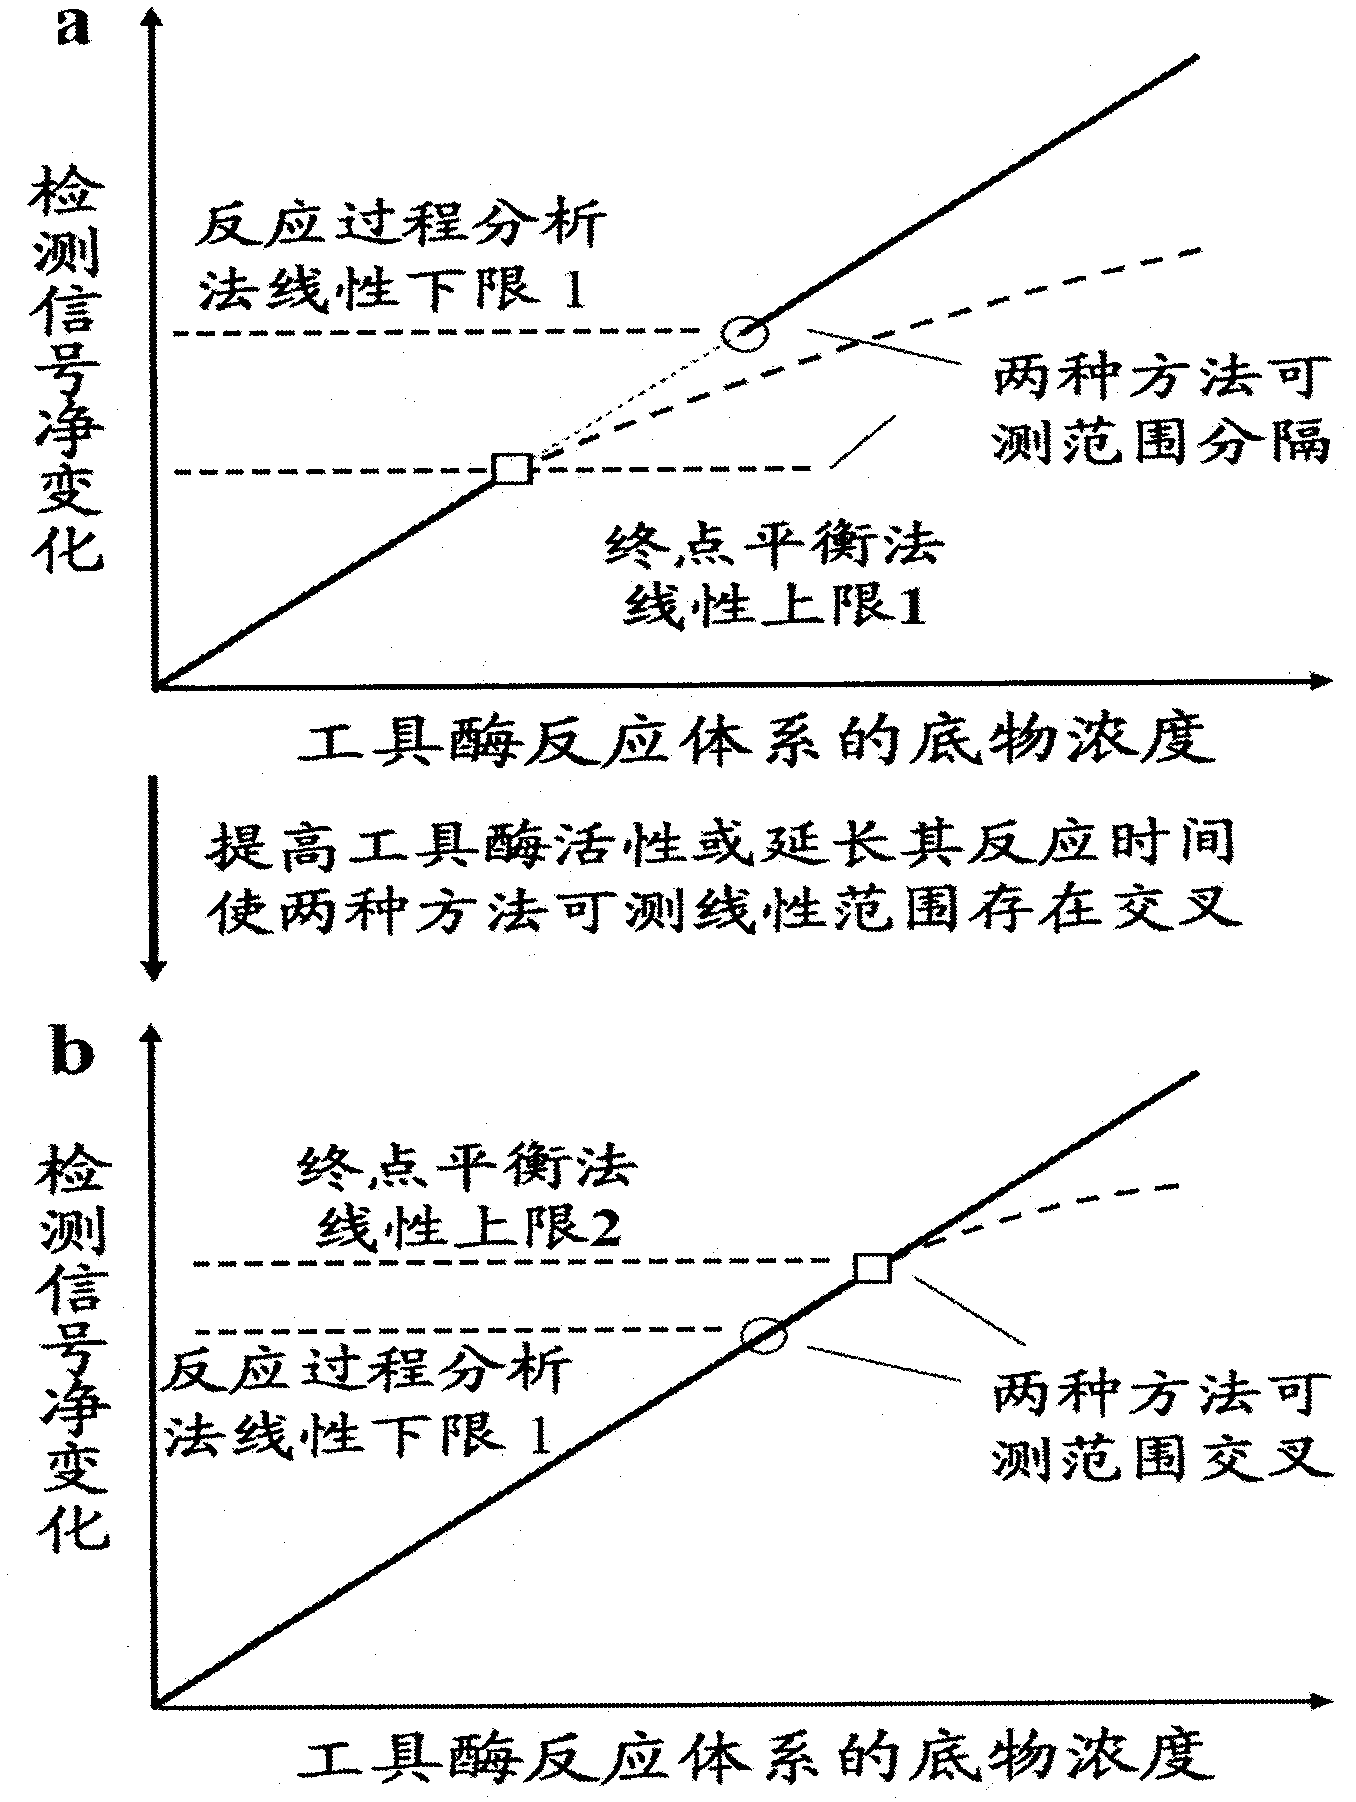 Method for measuring enzyme substrate amount by combining enzyme reaction process method and terminal balance method